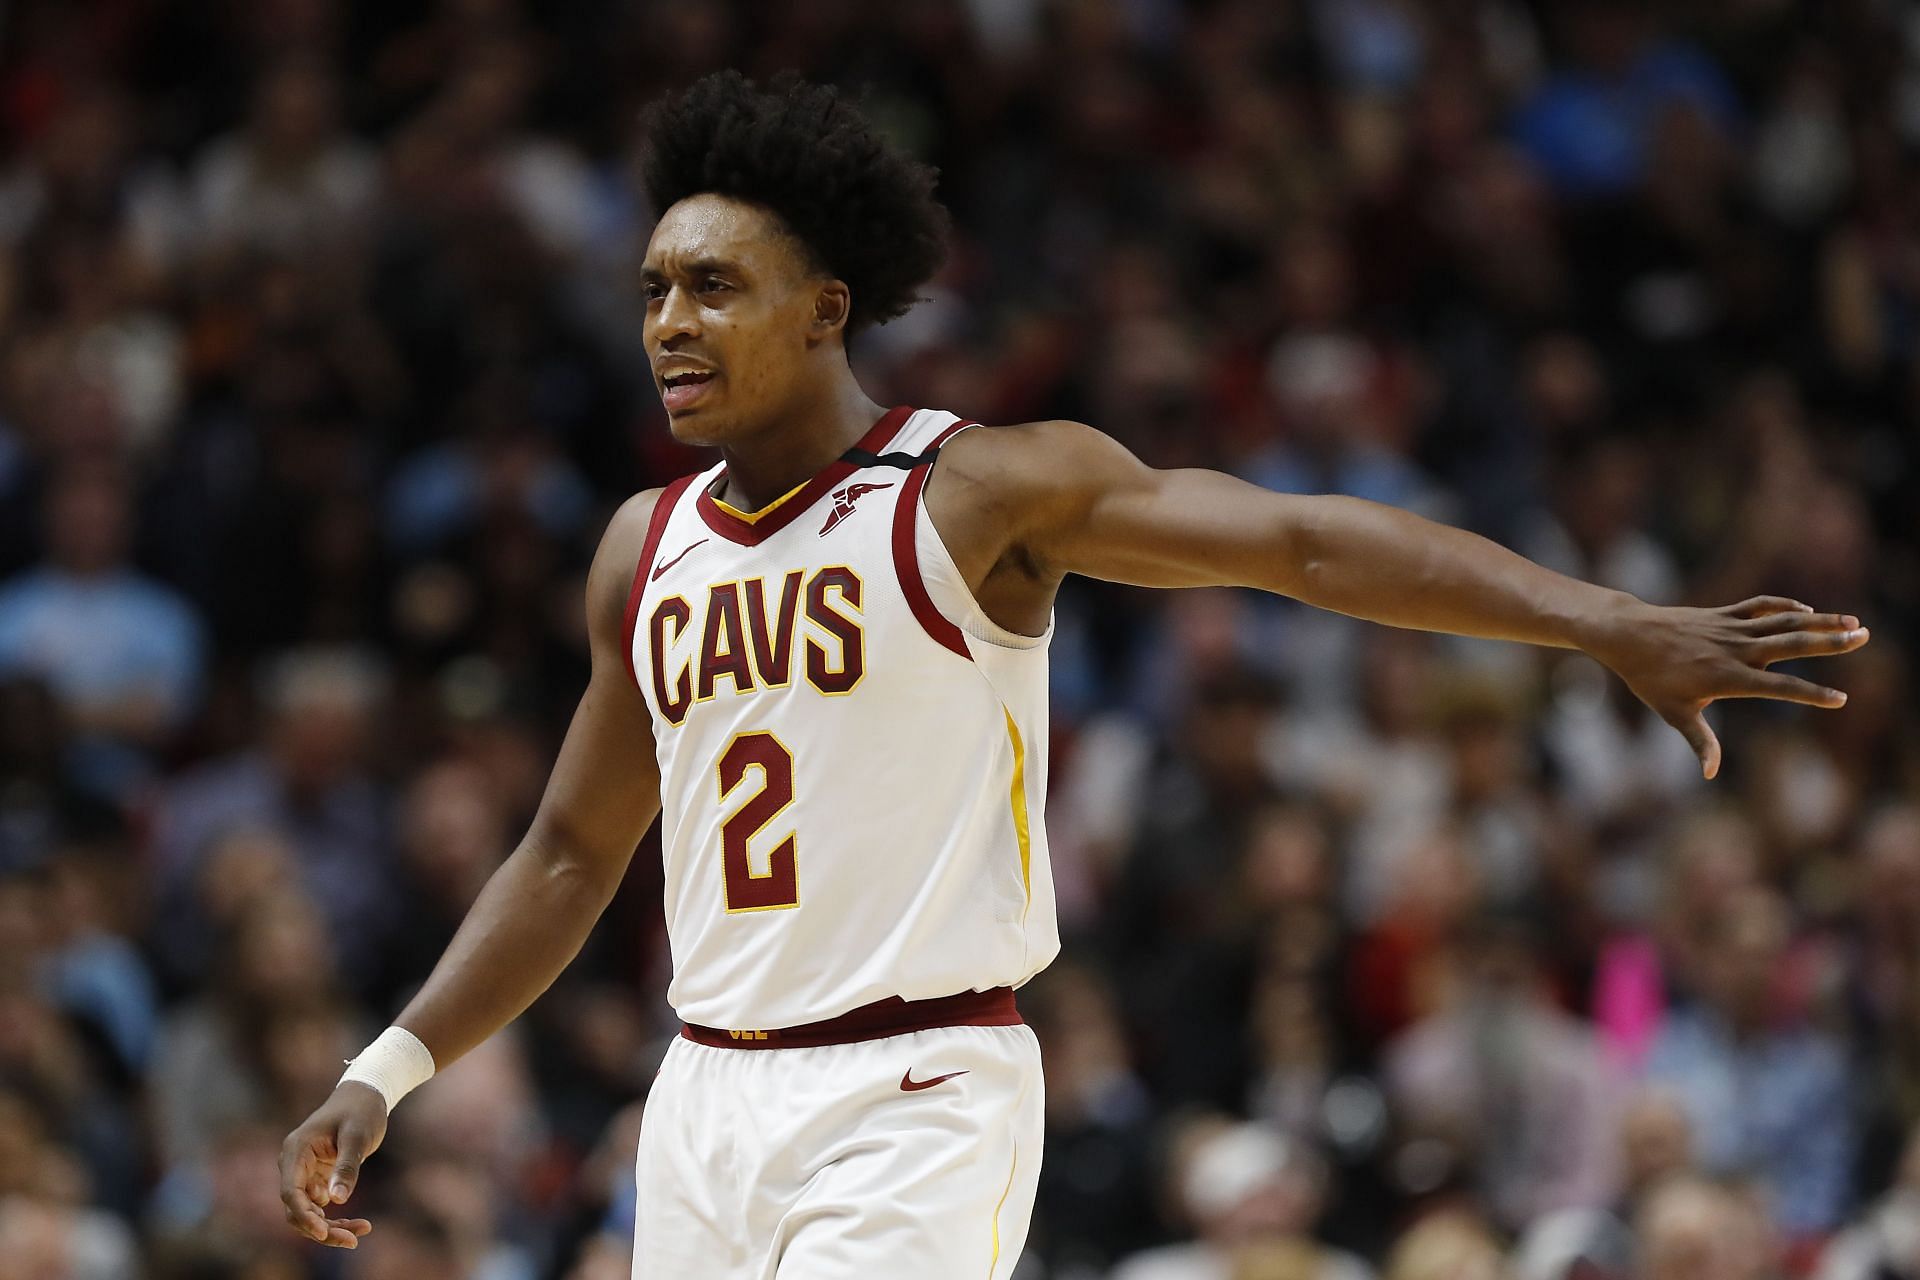 Collin Sexton of the Cleveland Cavaliers during the 2019-20 season